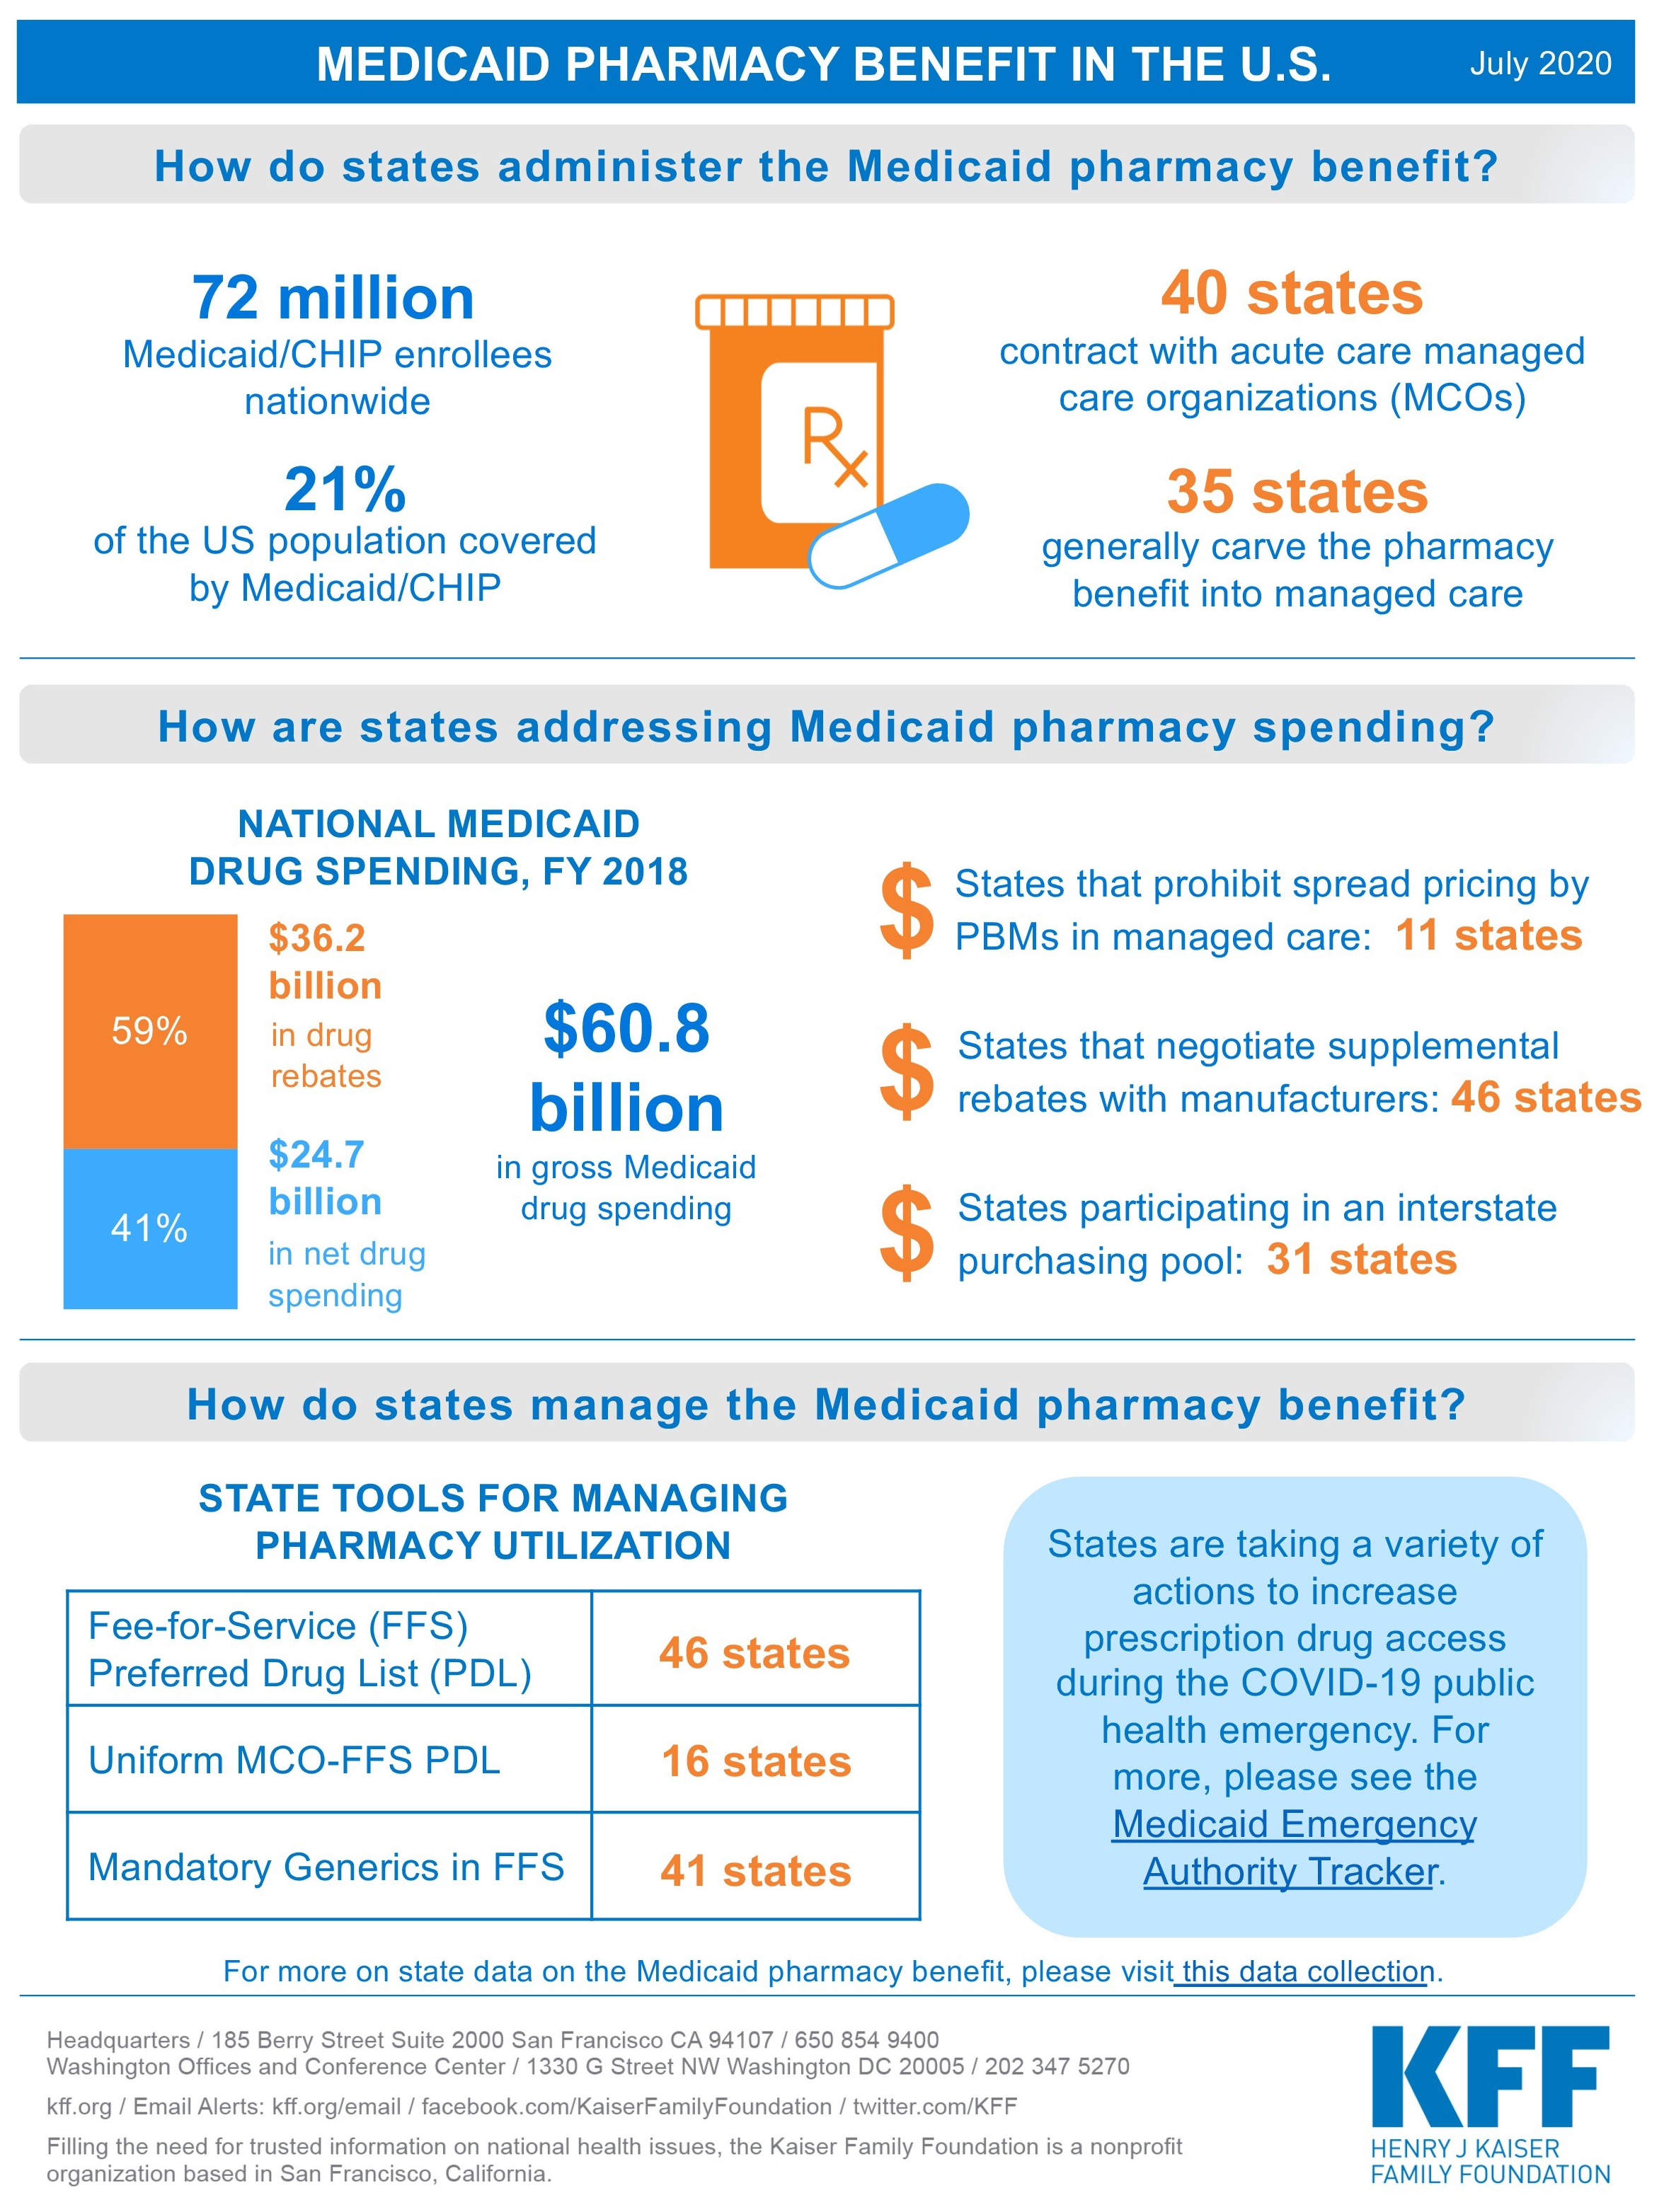 Medicaid Pharmacy Benefit in the U.S. - How States Administer - Infographic - KFF